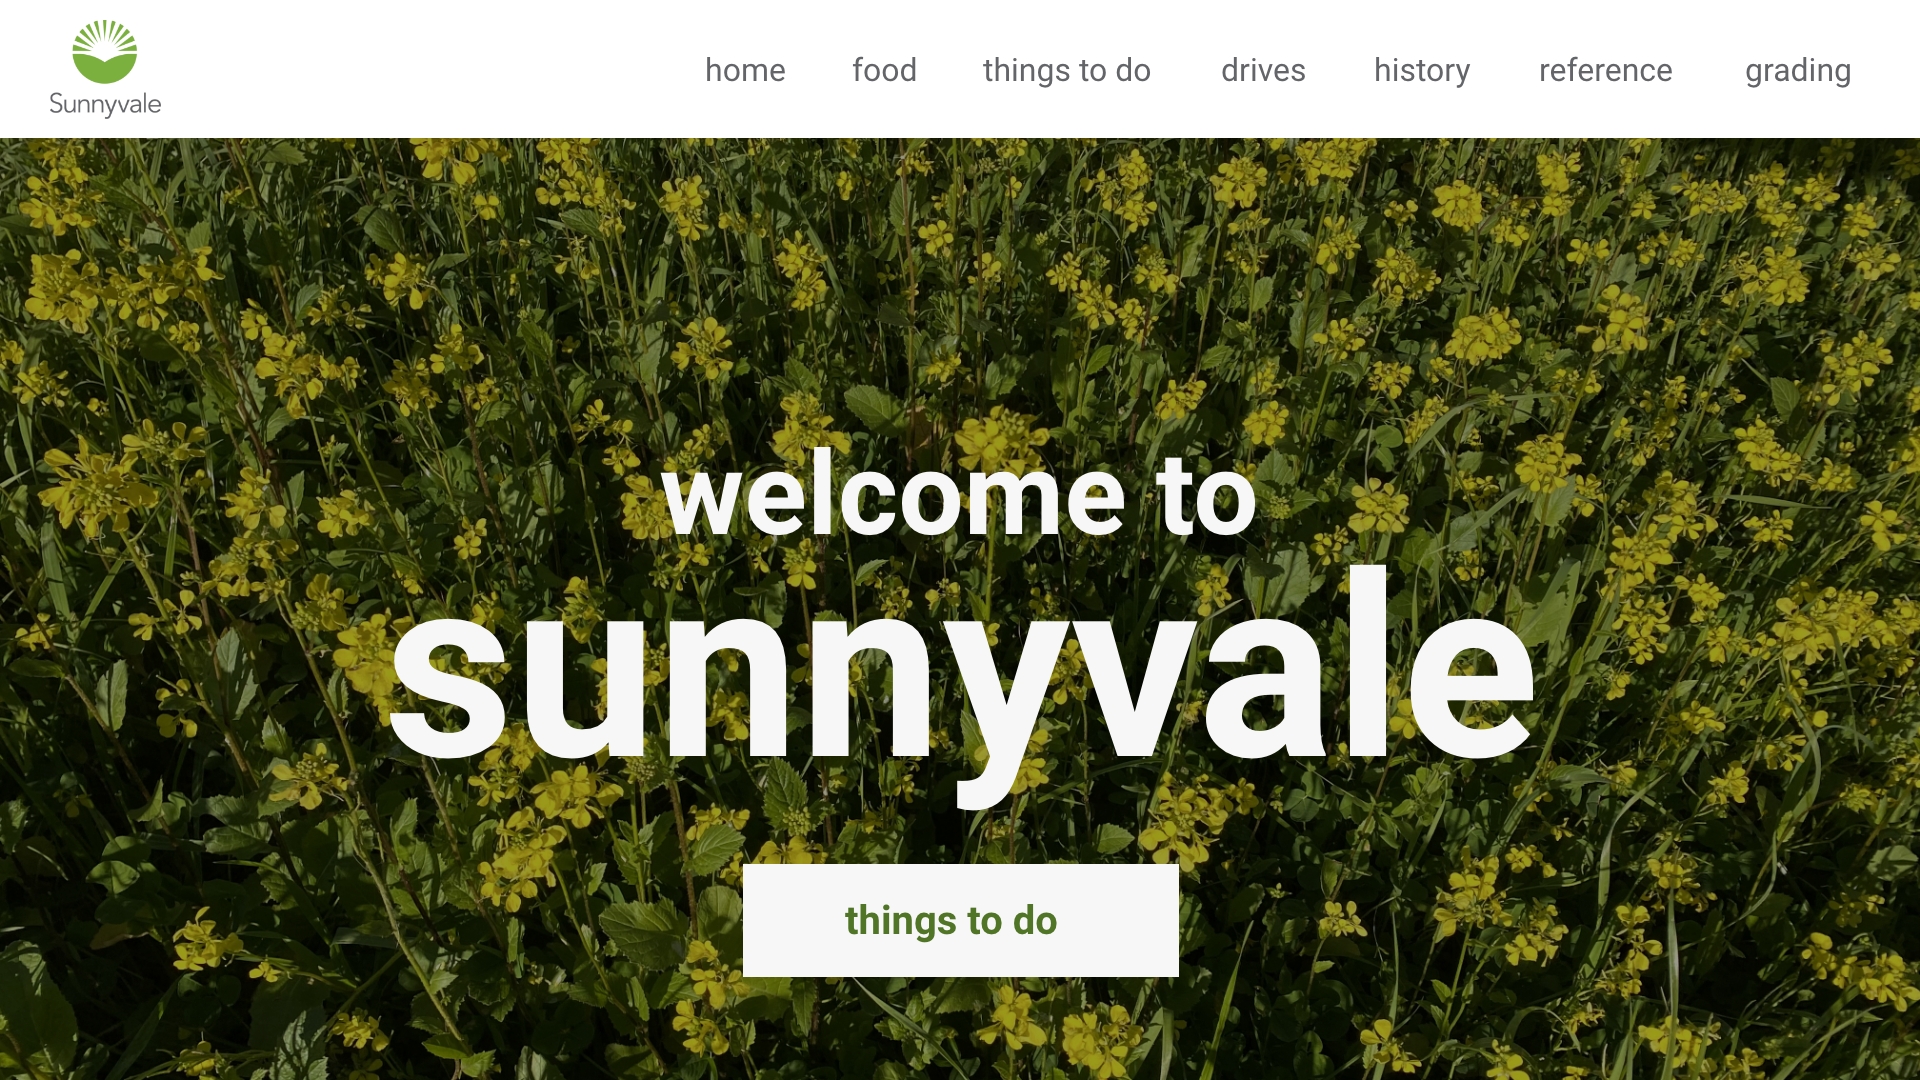 link to a website i made about sunnyvale, ca